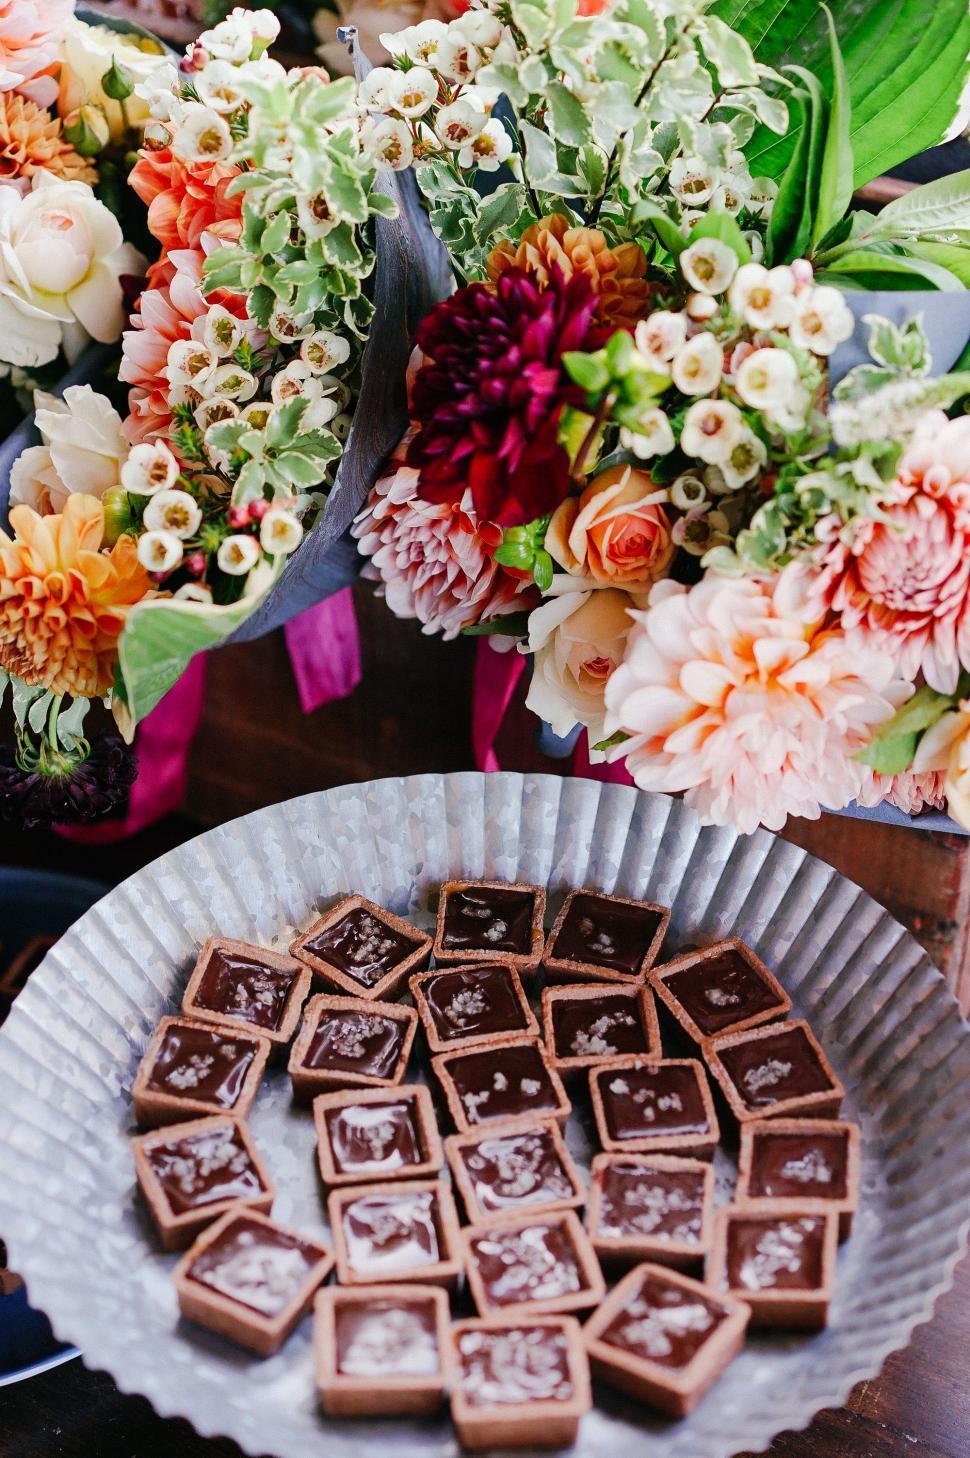 Free Image of Chocolates and flowers  